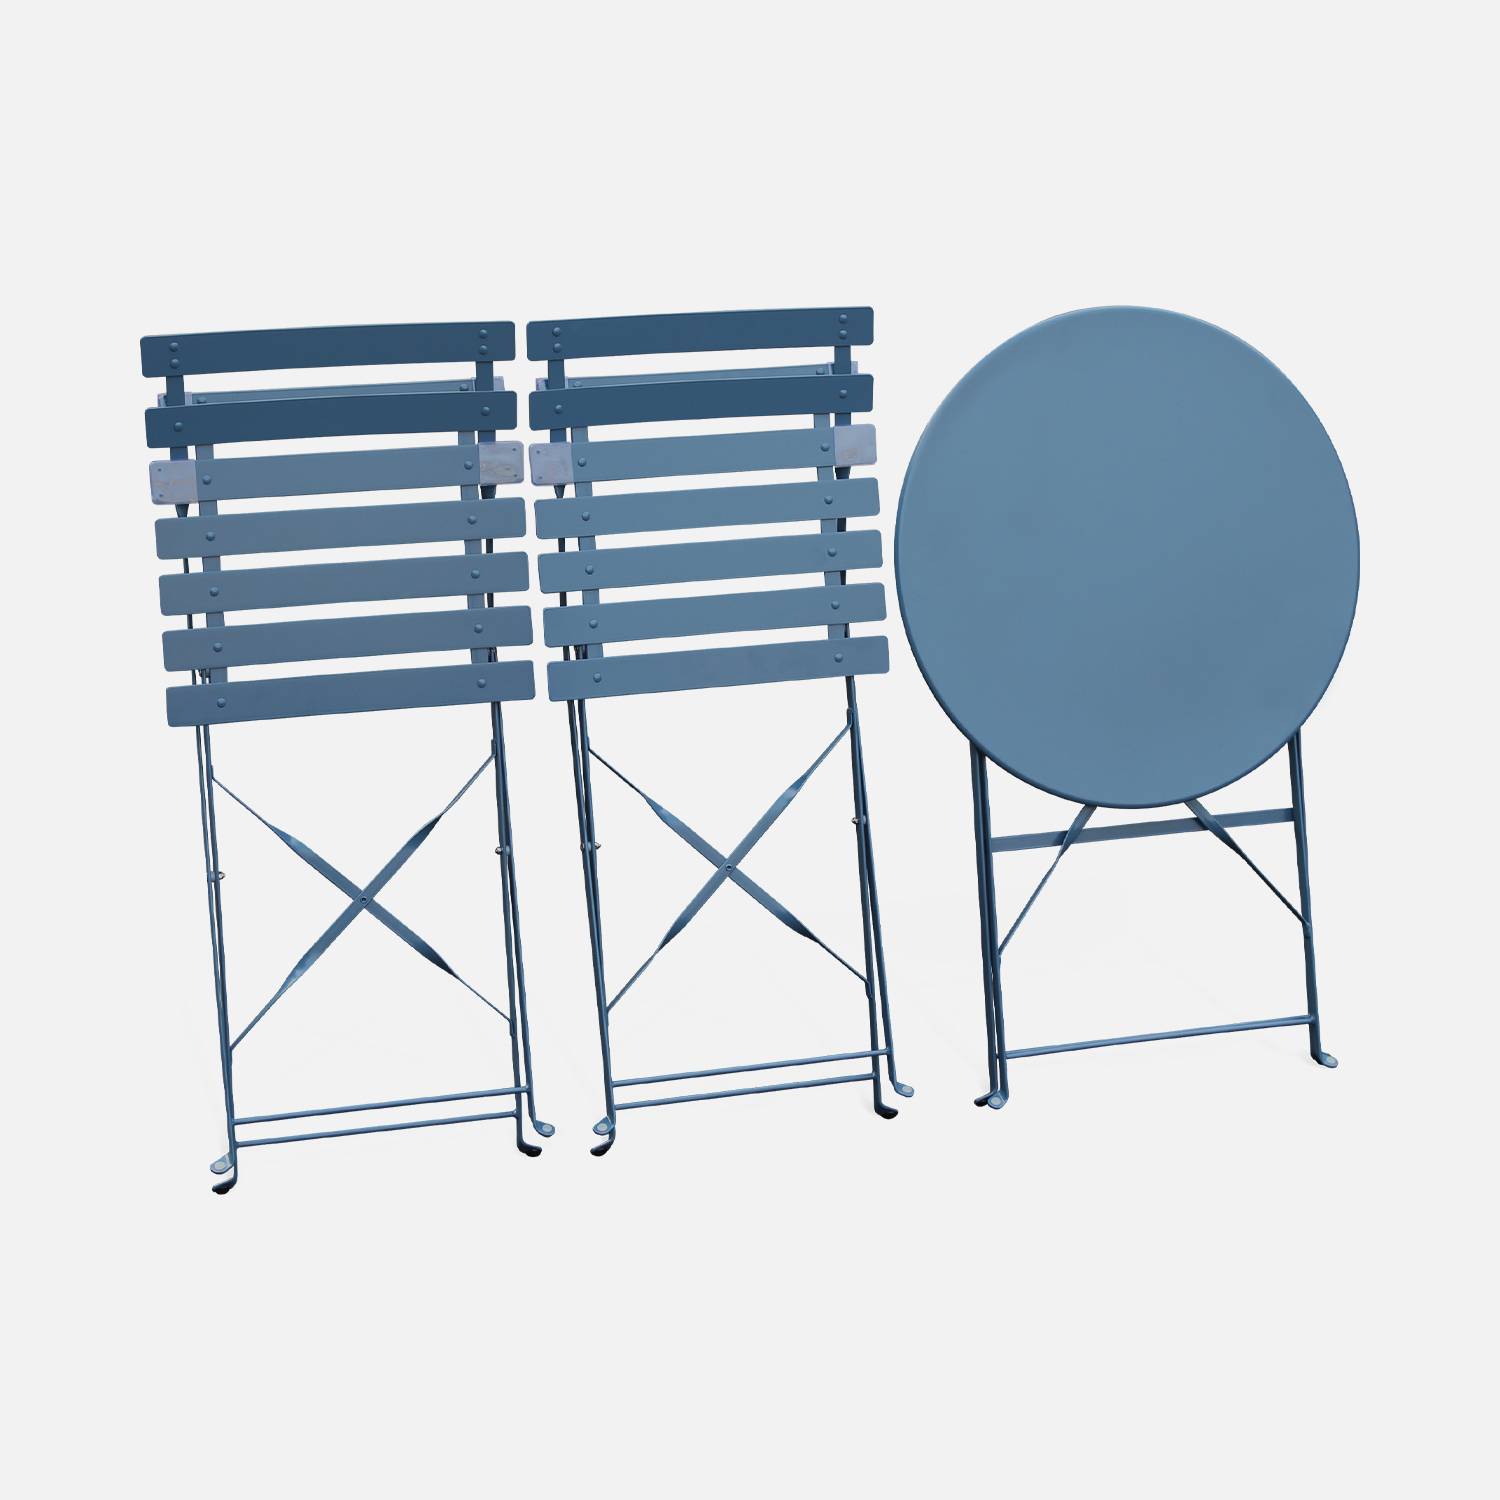 2-seater foldable thermo-lacquered steel bistro garden table with chairs, Ø60cm - Emilia - Grey blue,sweeek,Photo6